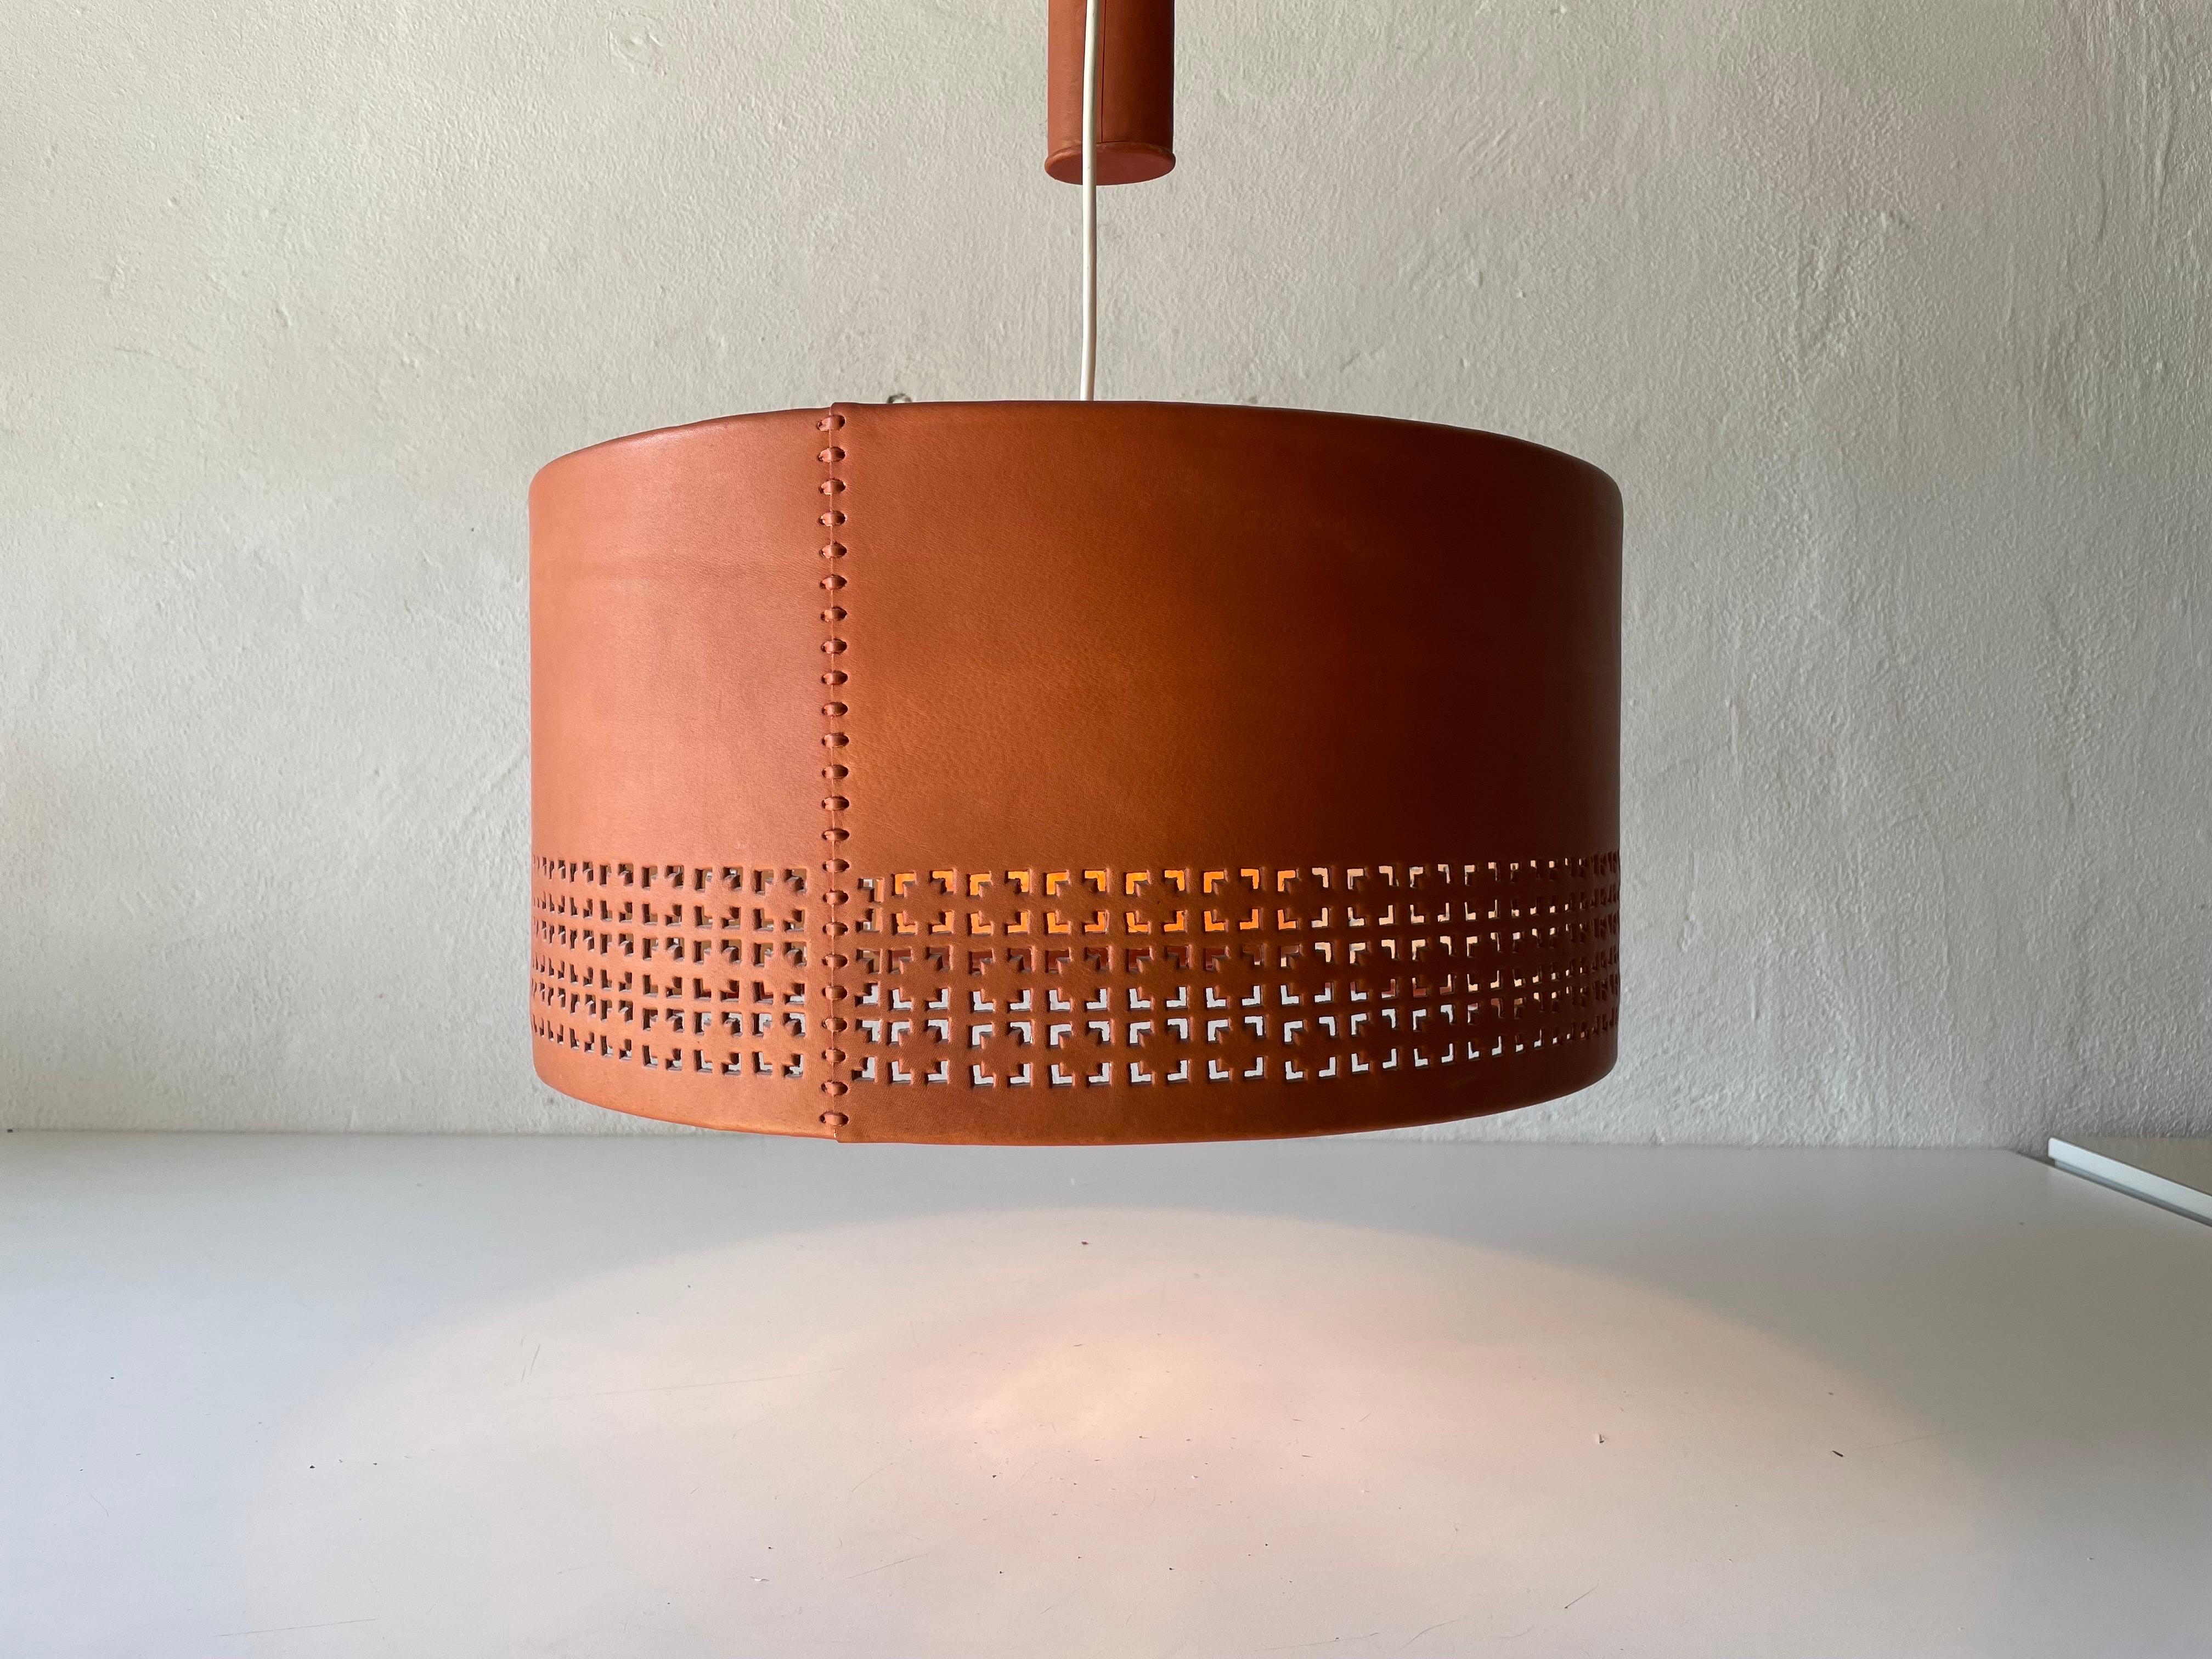 Cylindrical Leather Shade with Motifs Counterweight Pendant Lamp, 1960s, Germany For Sale 15